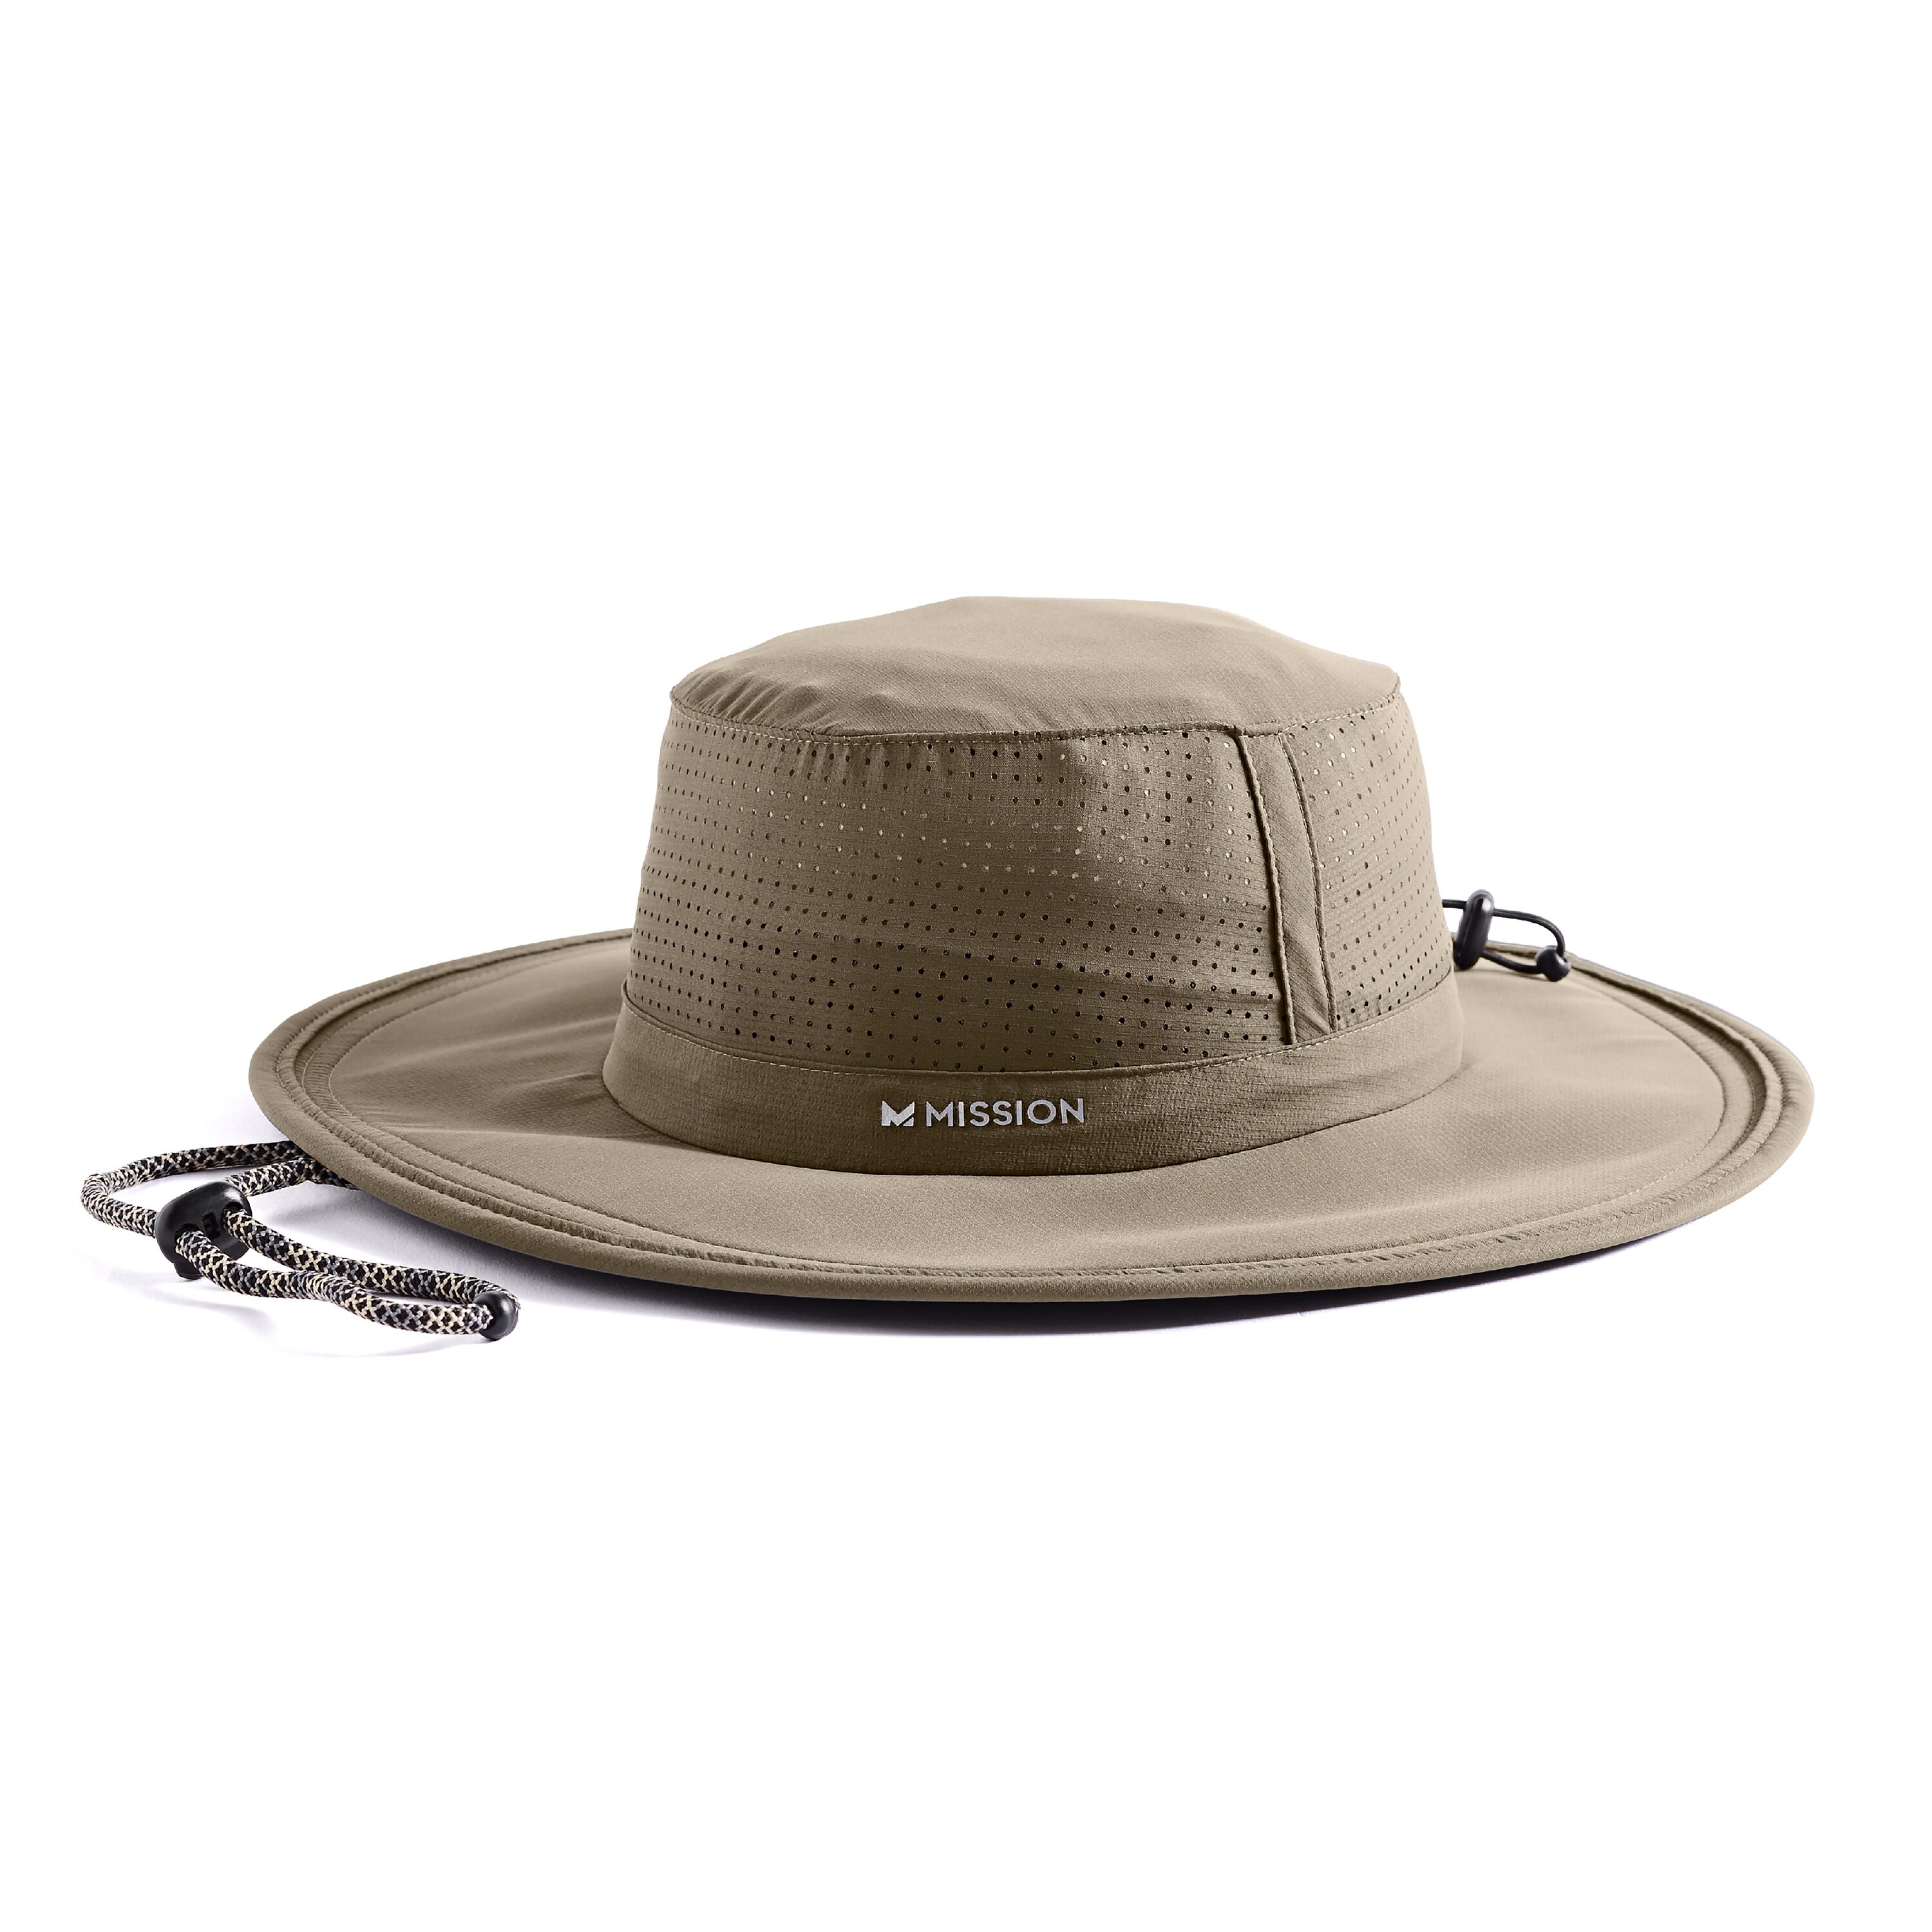 Mission Adult Unisex Cooling Hat - One Size Fits Most - Active